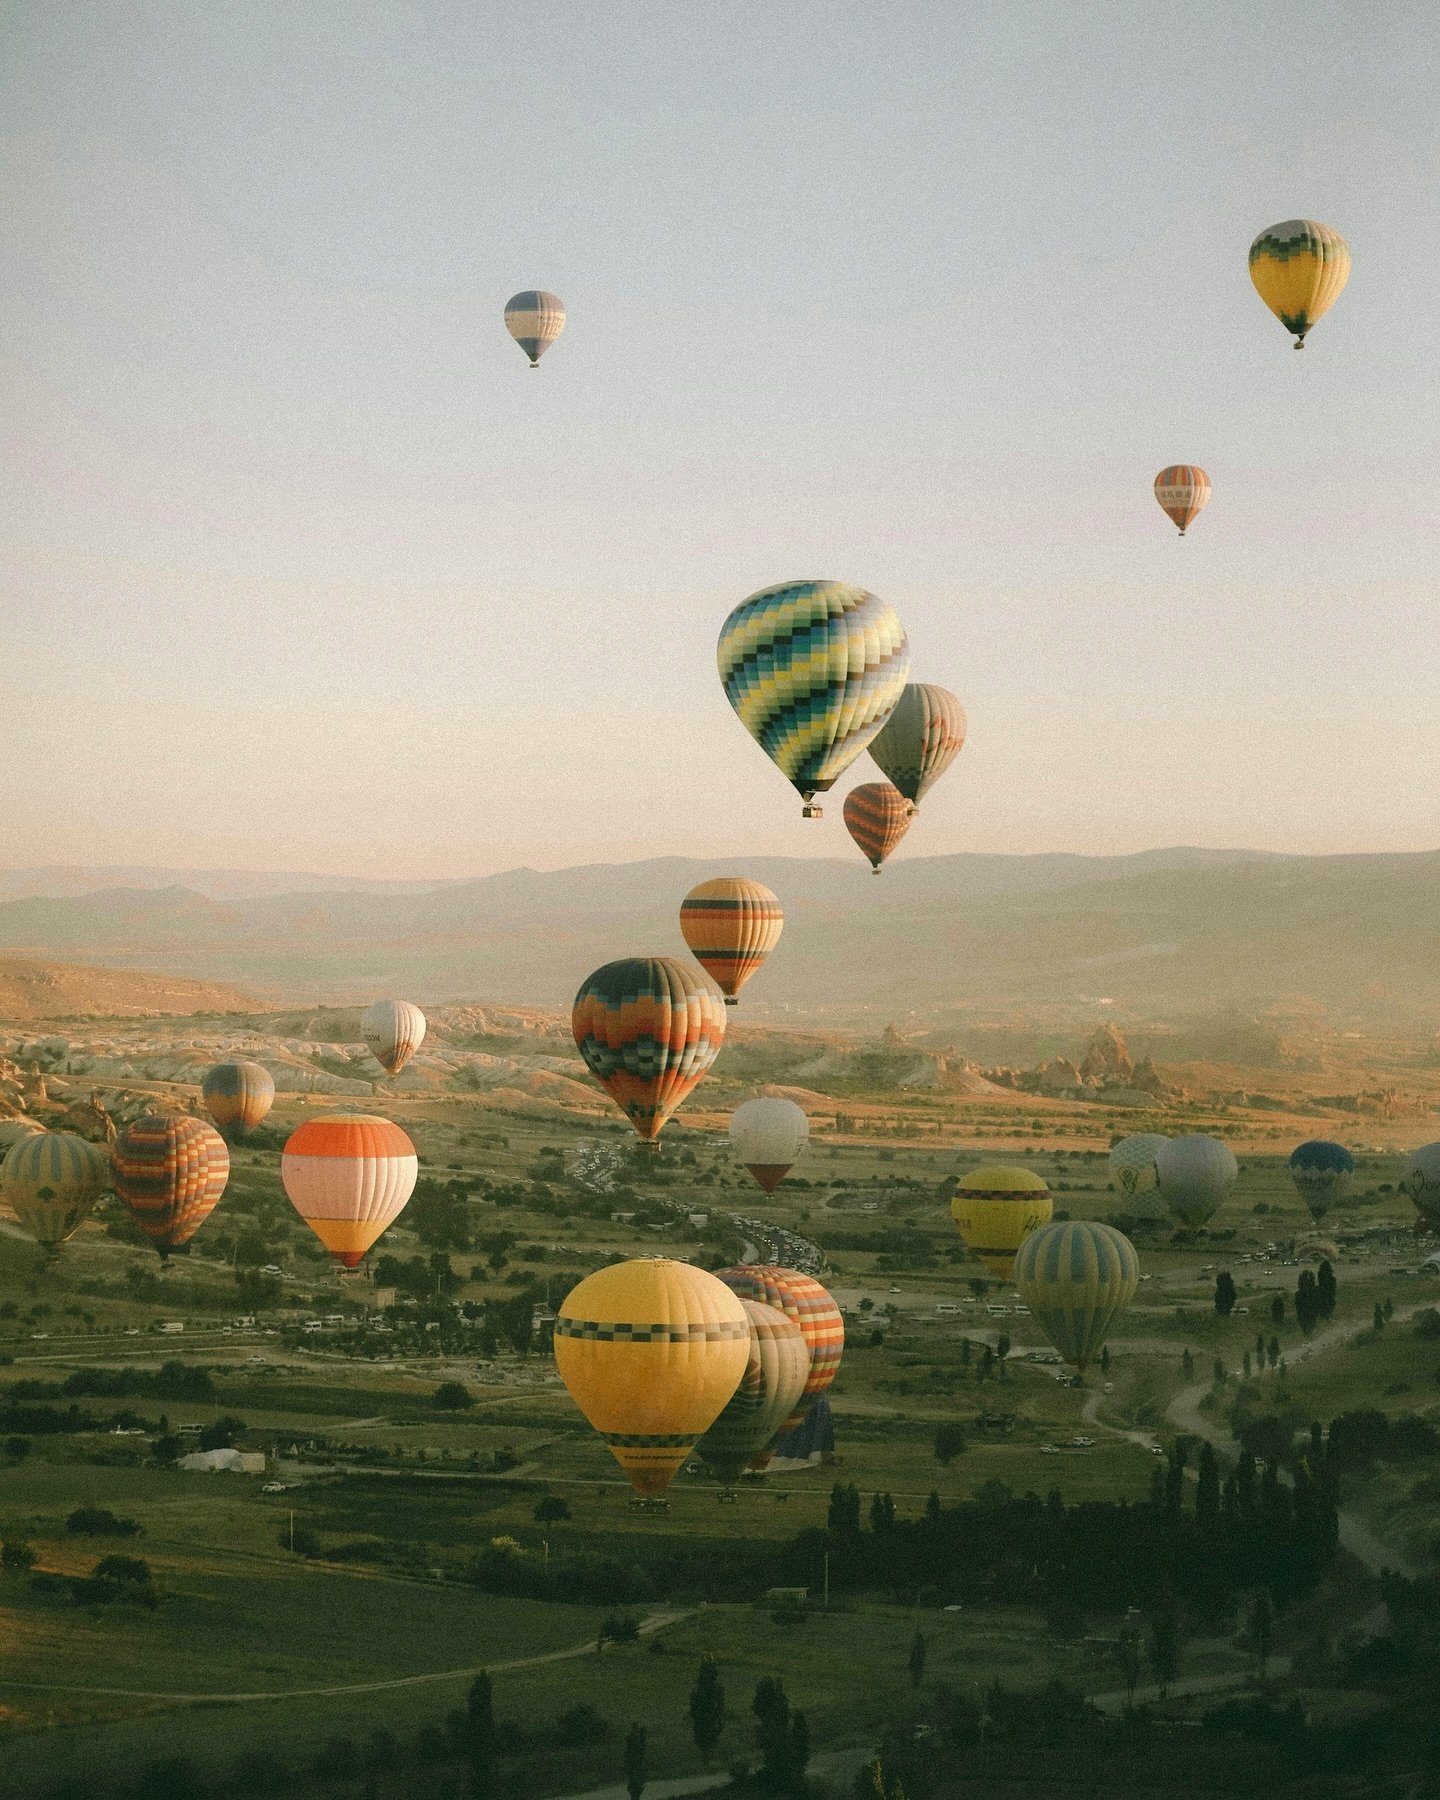 I&rsquo;d been sitting on a cliff on a high hill or mountain and the air around me was full of hot air balloons. Some were close and clear and vibrant and others were tiny, spots in the distance and hard to make out. There were a dozen or maybe more 